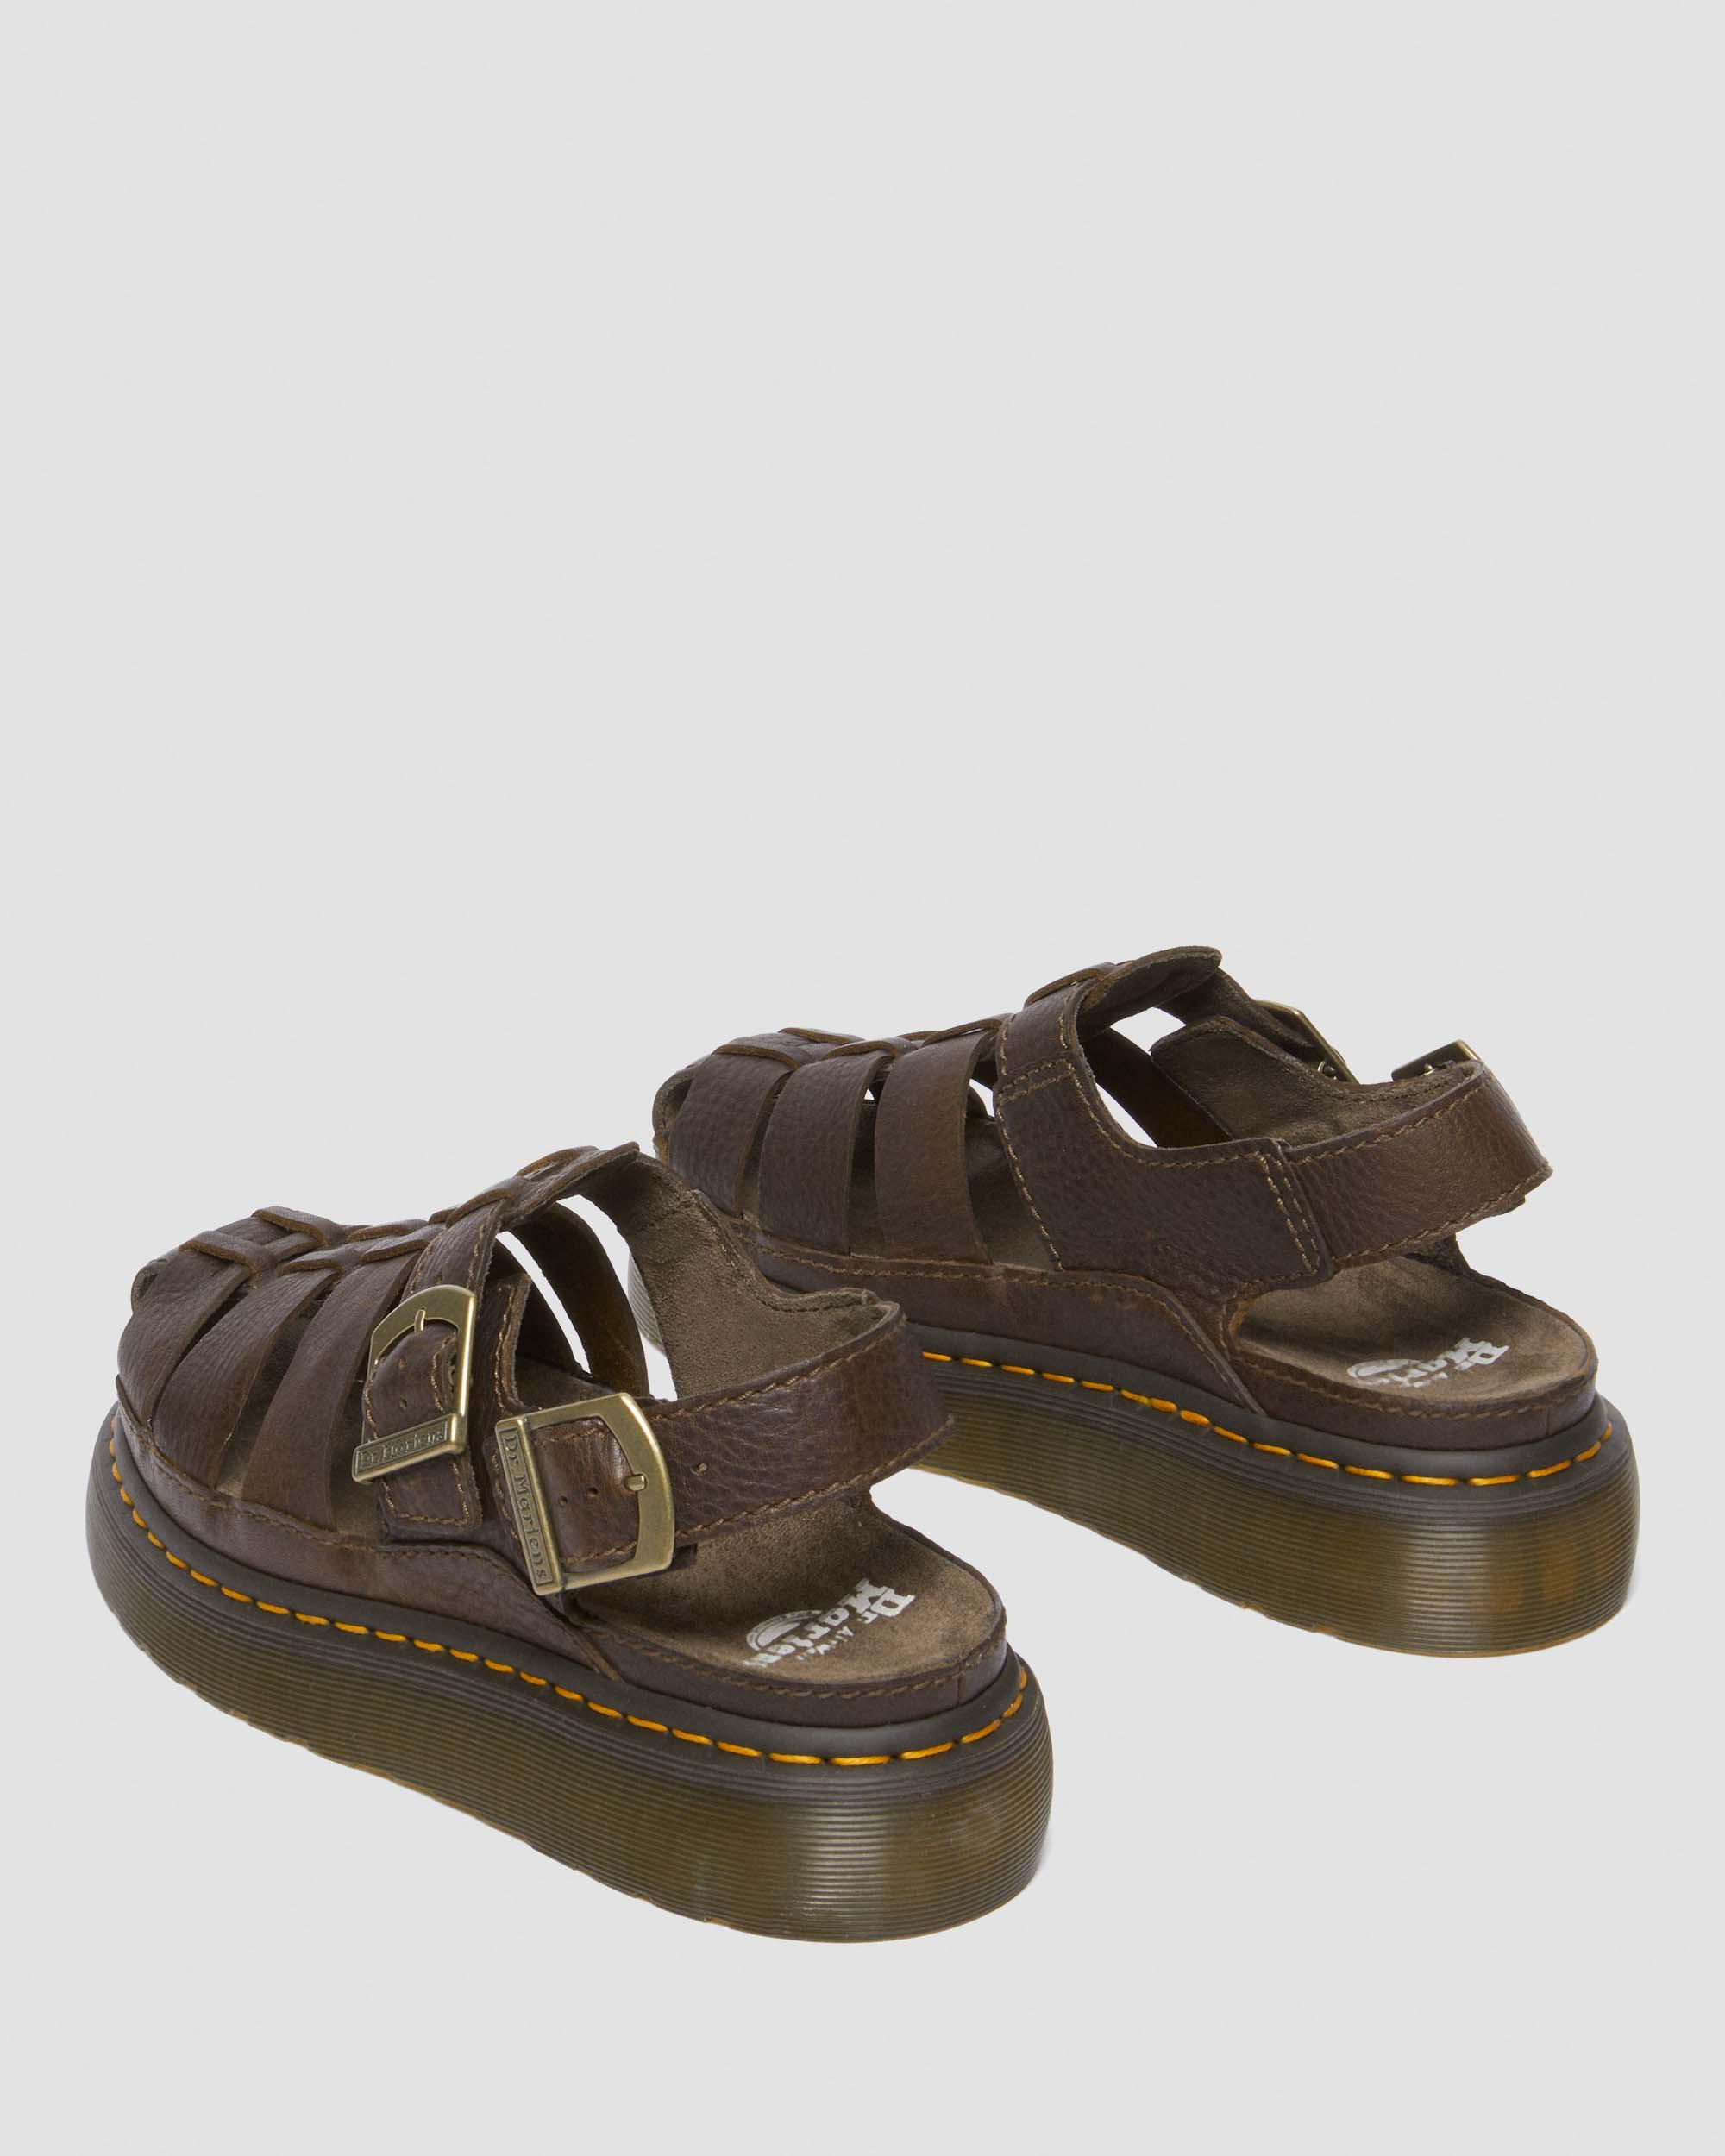 Wrenlie Grizzly Leather Fisherman Sandals in Dark Brown